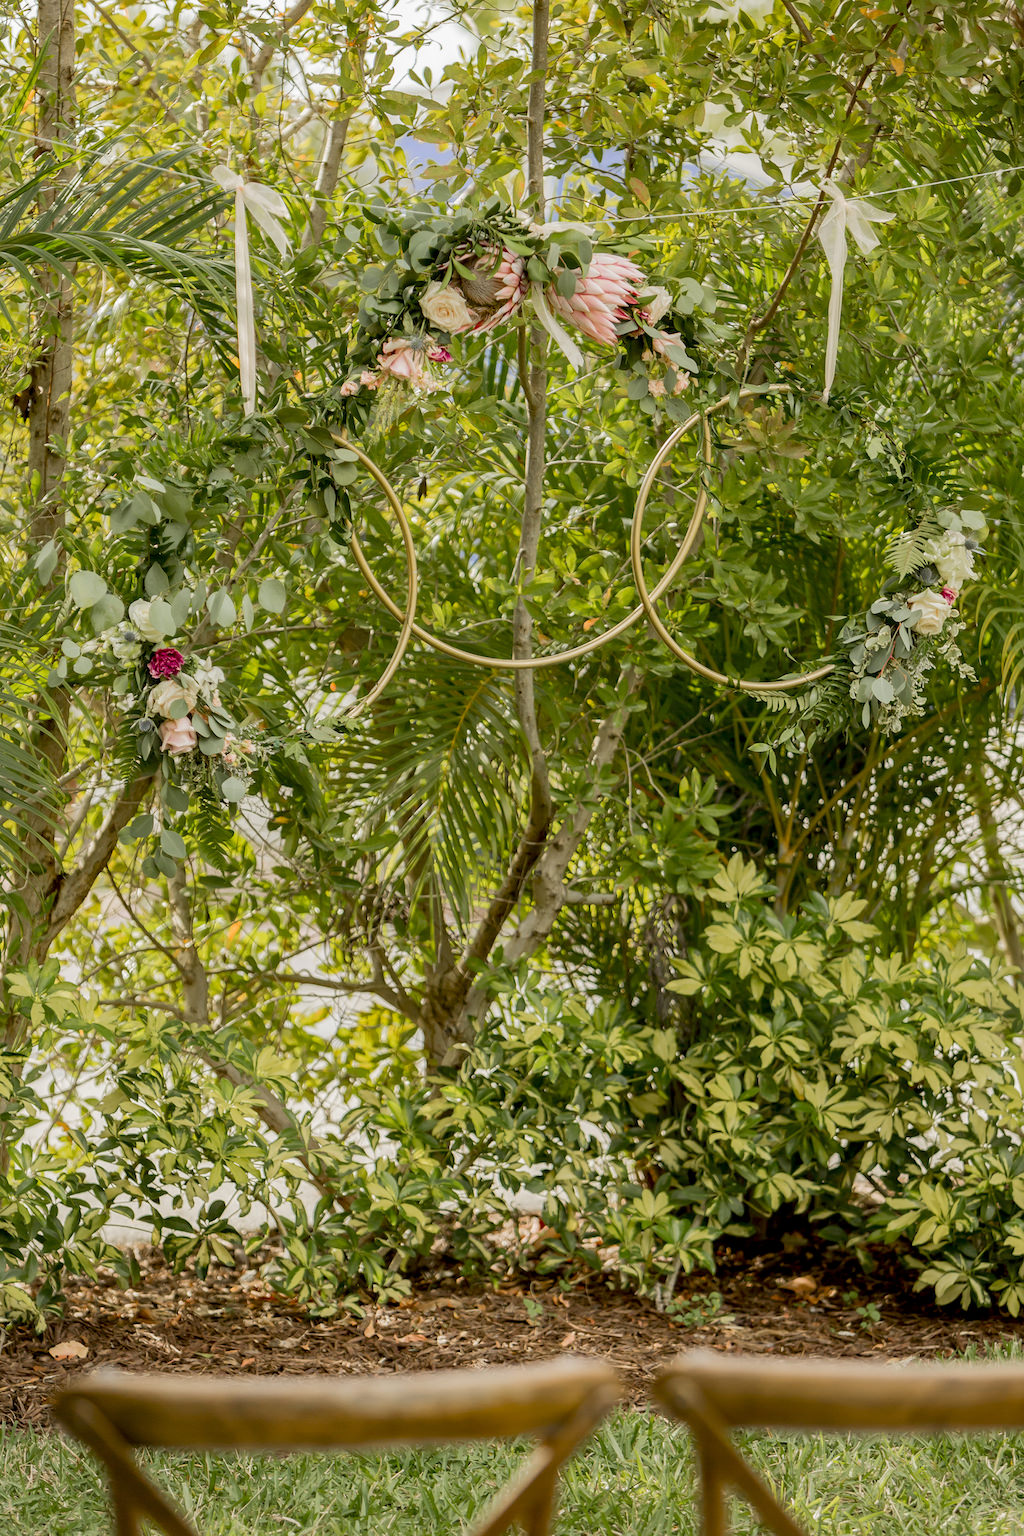 St. Pete Garden Wedding Ceremony Decor, Three Hanging Golden Hoops with King Proteas, Ivory, Red and Blush Pink Roses and Greenery Floral Arrangements